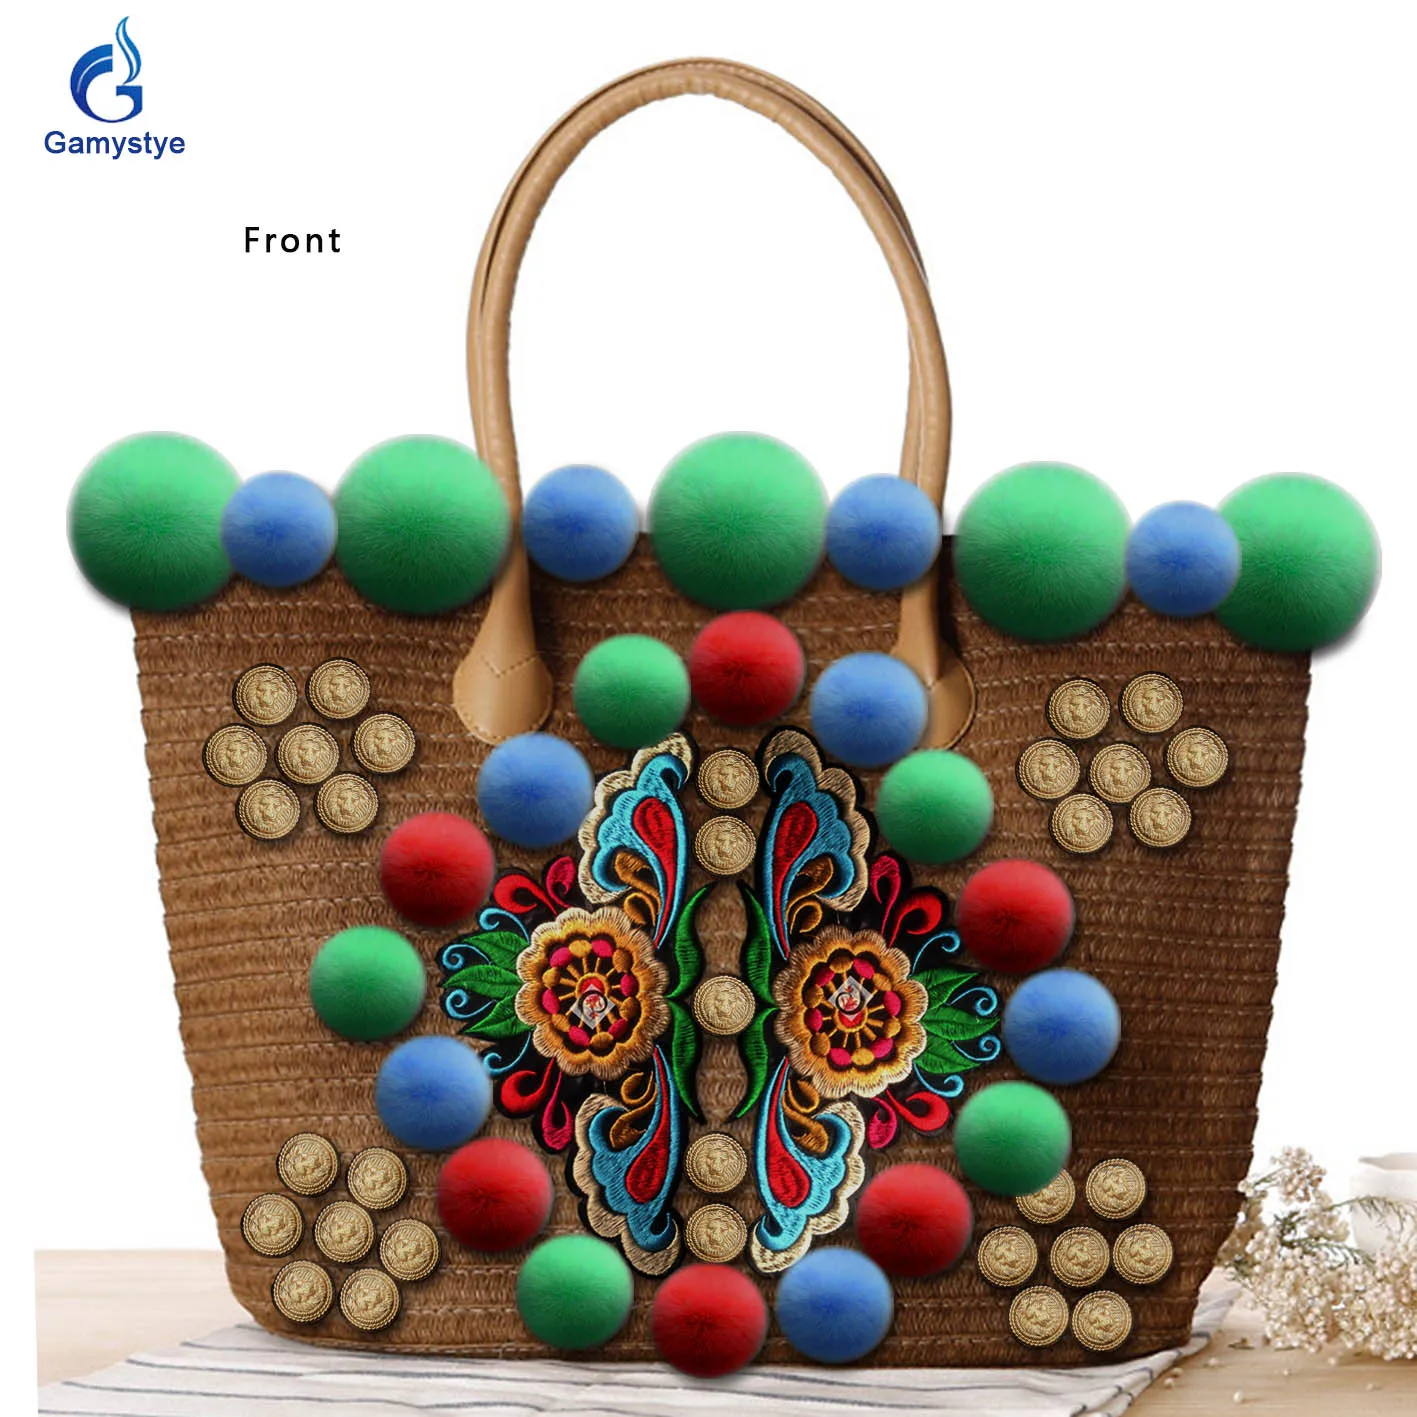 Art Hand-Make Hairball Customize Totes Ladies purses and handbags Messenger Clutch Totes Weaving Hairball Straw Bags Travel